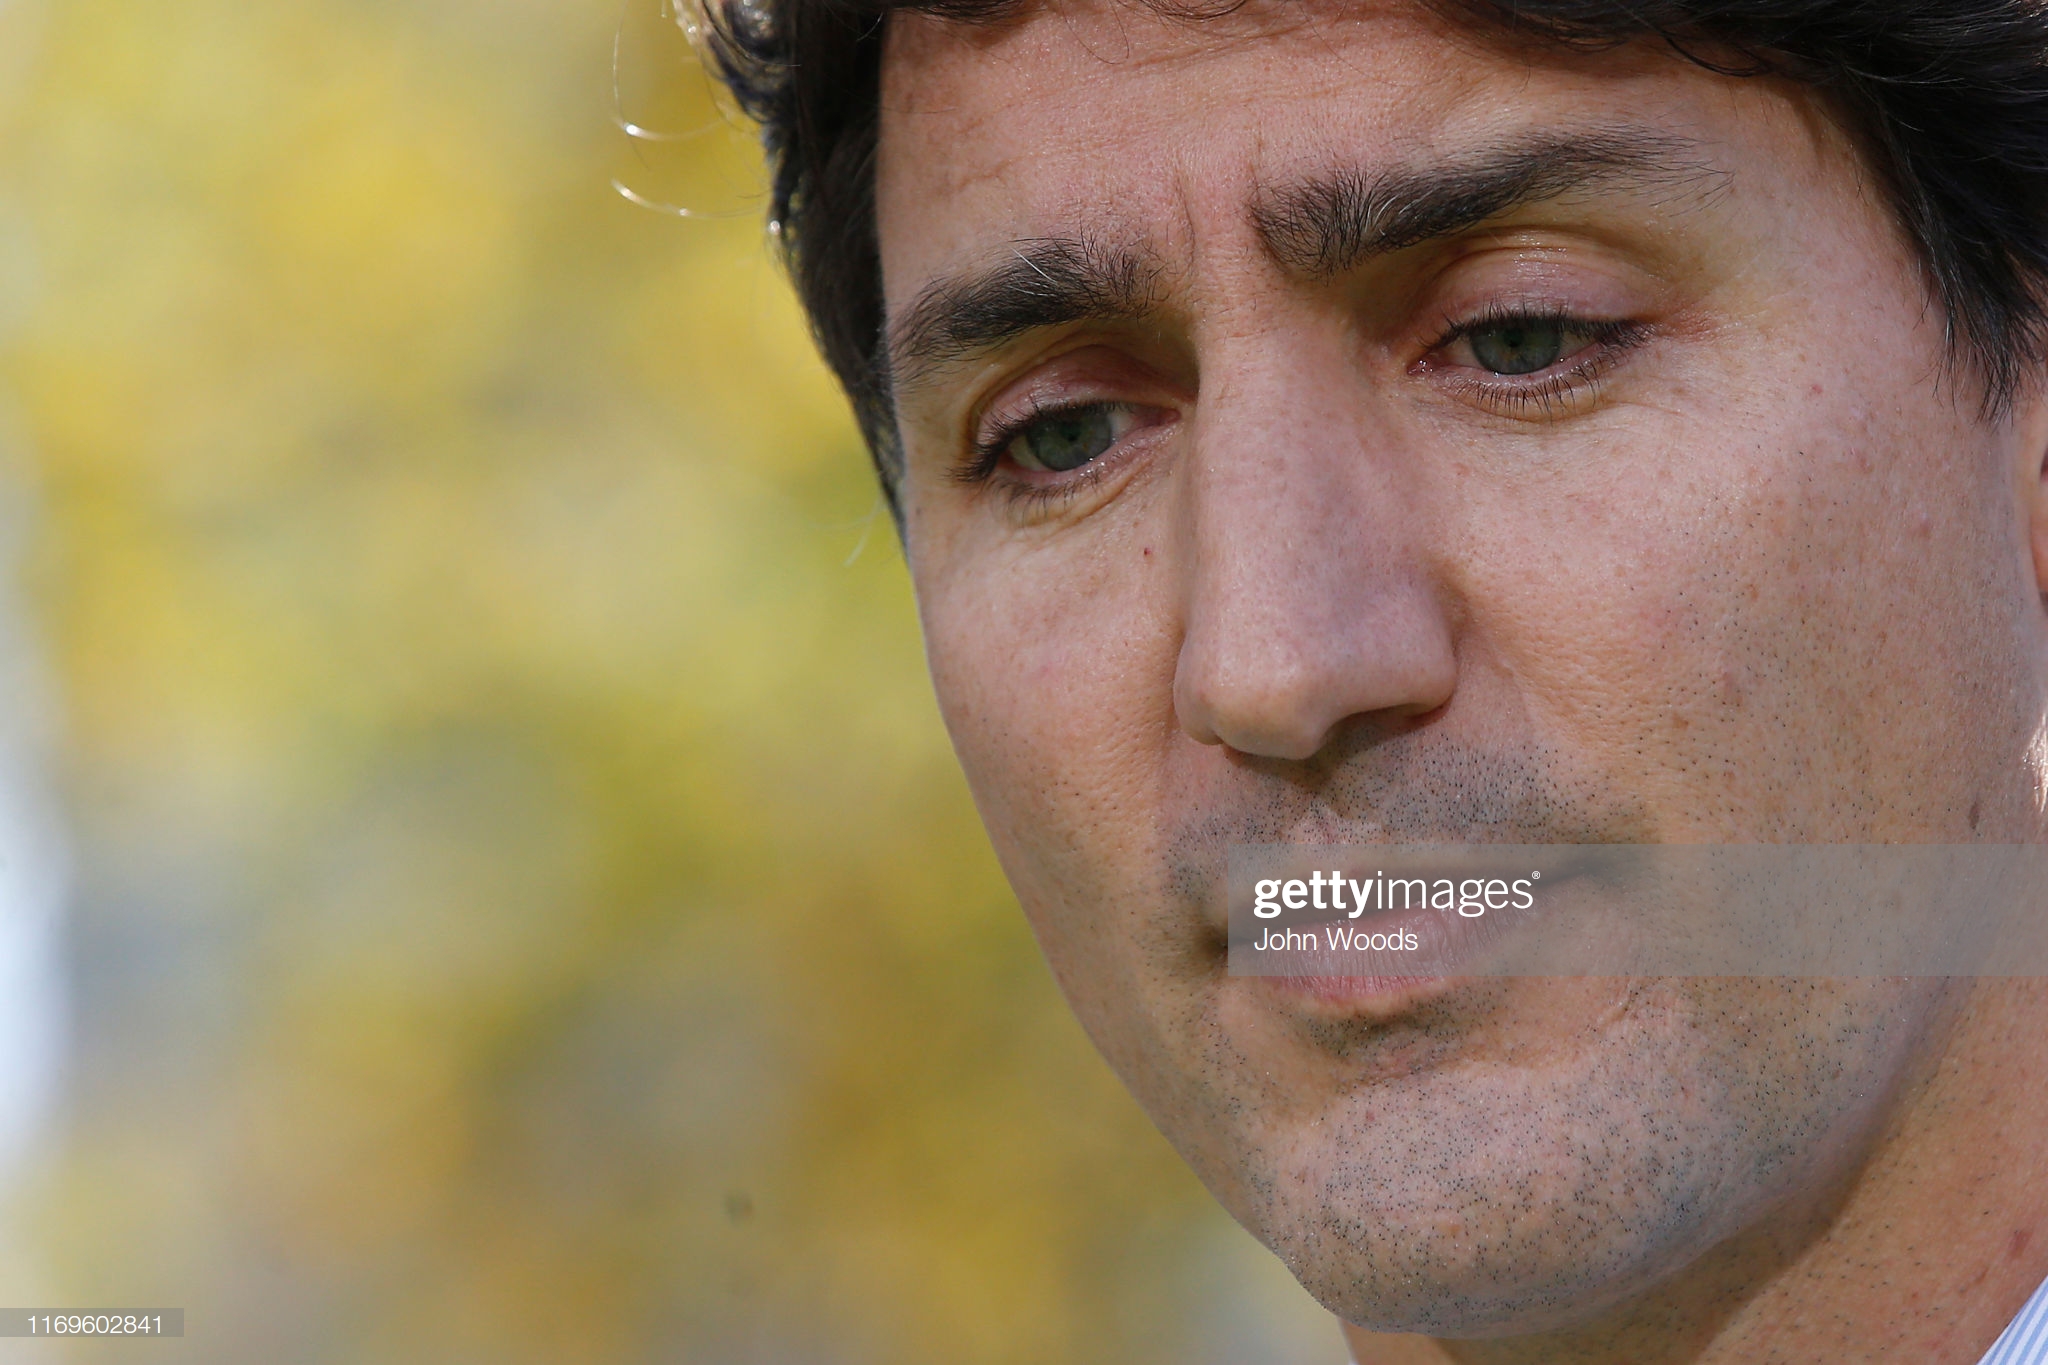 justin-trudeau-says-sorry-over-dayo